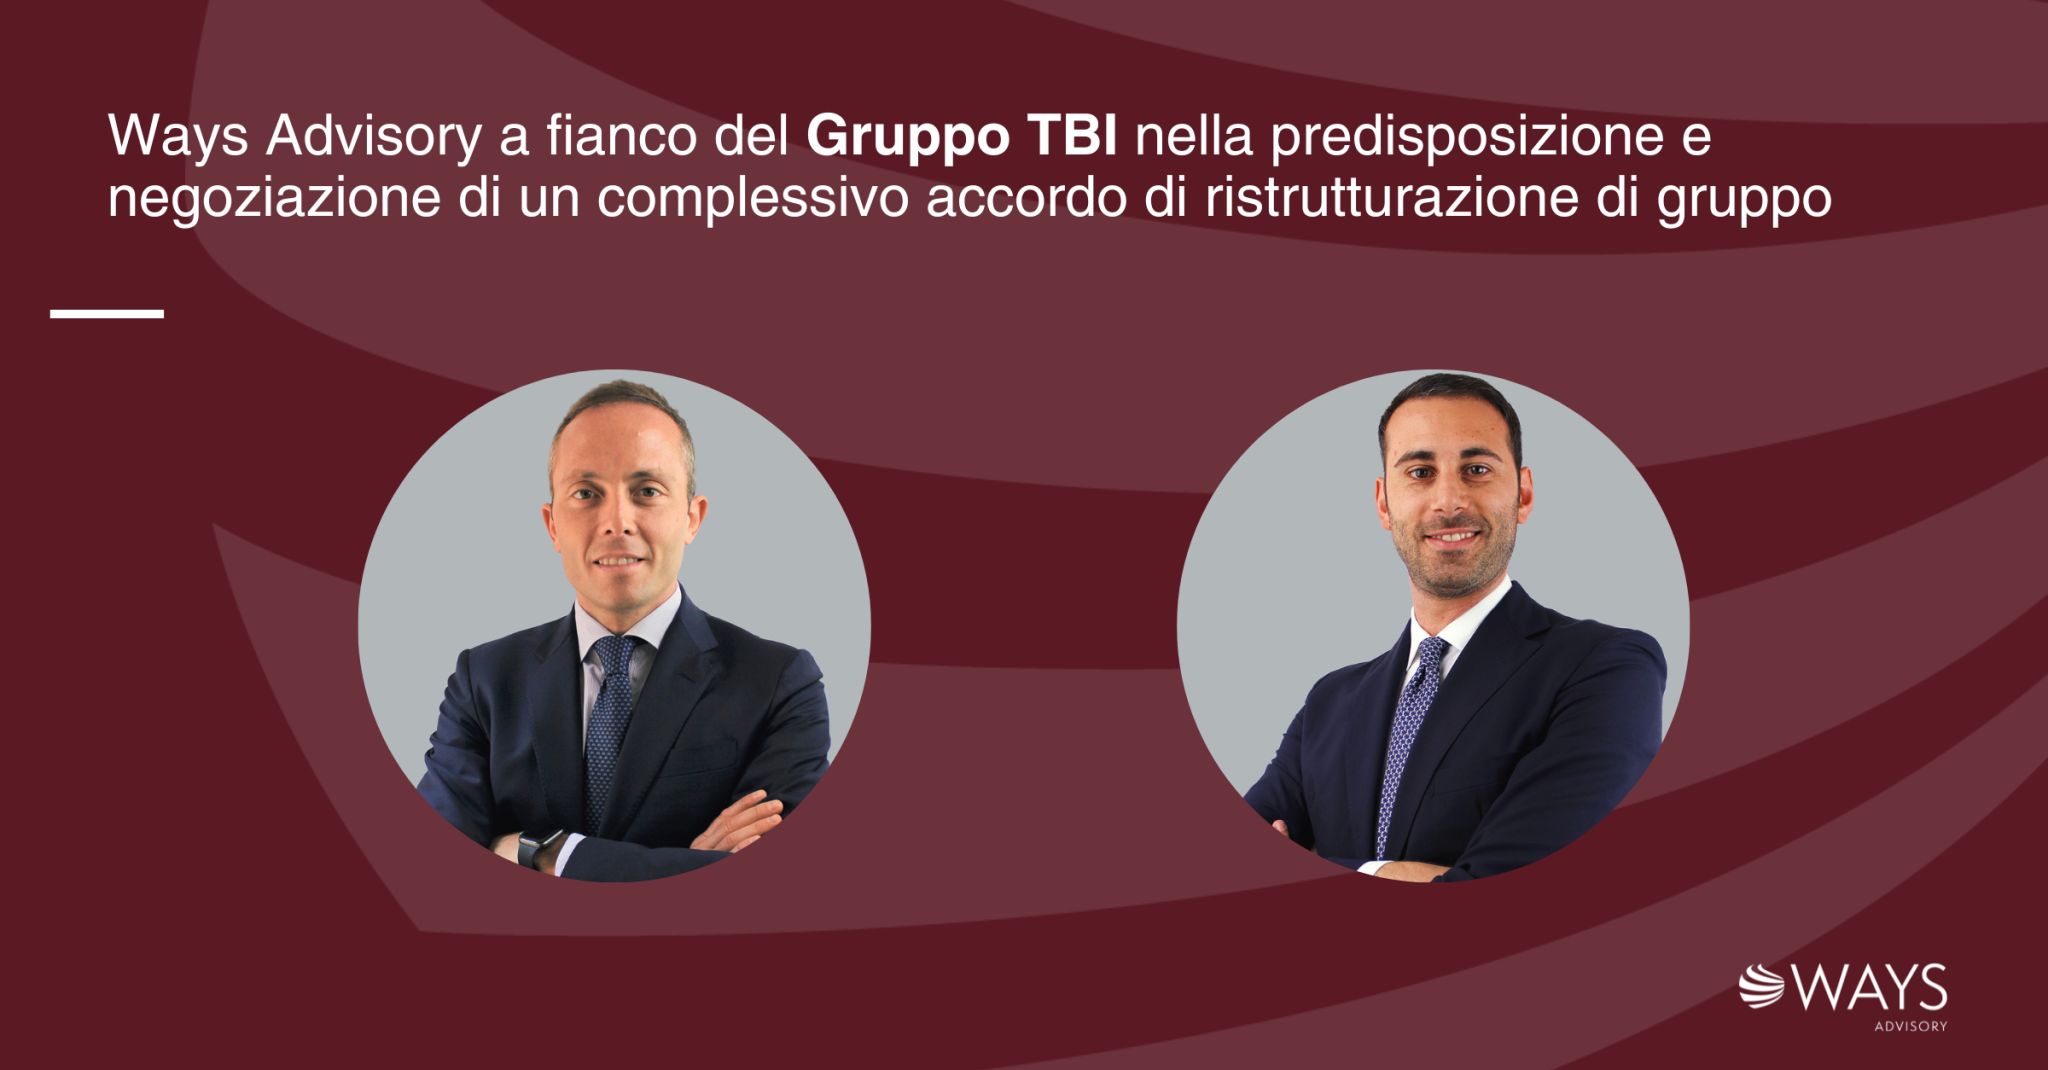 The Ways Advisory team assisted the TBI GROUP in the preparation and negotiation of a comprehensive group restructuring agreement